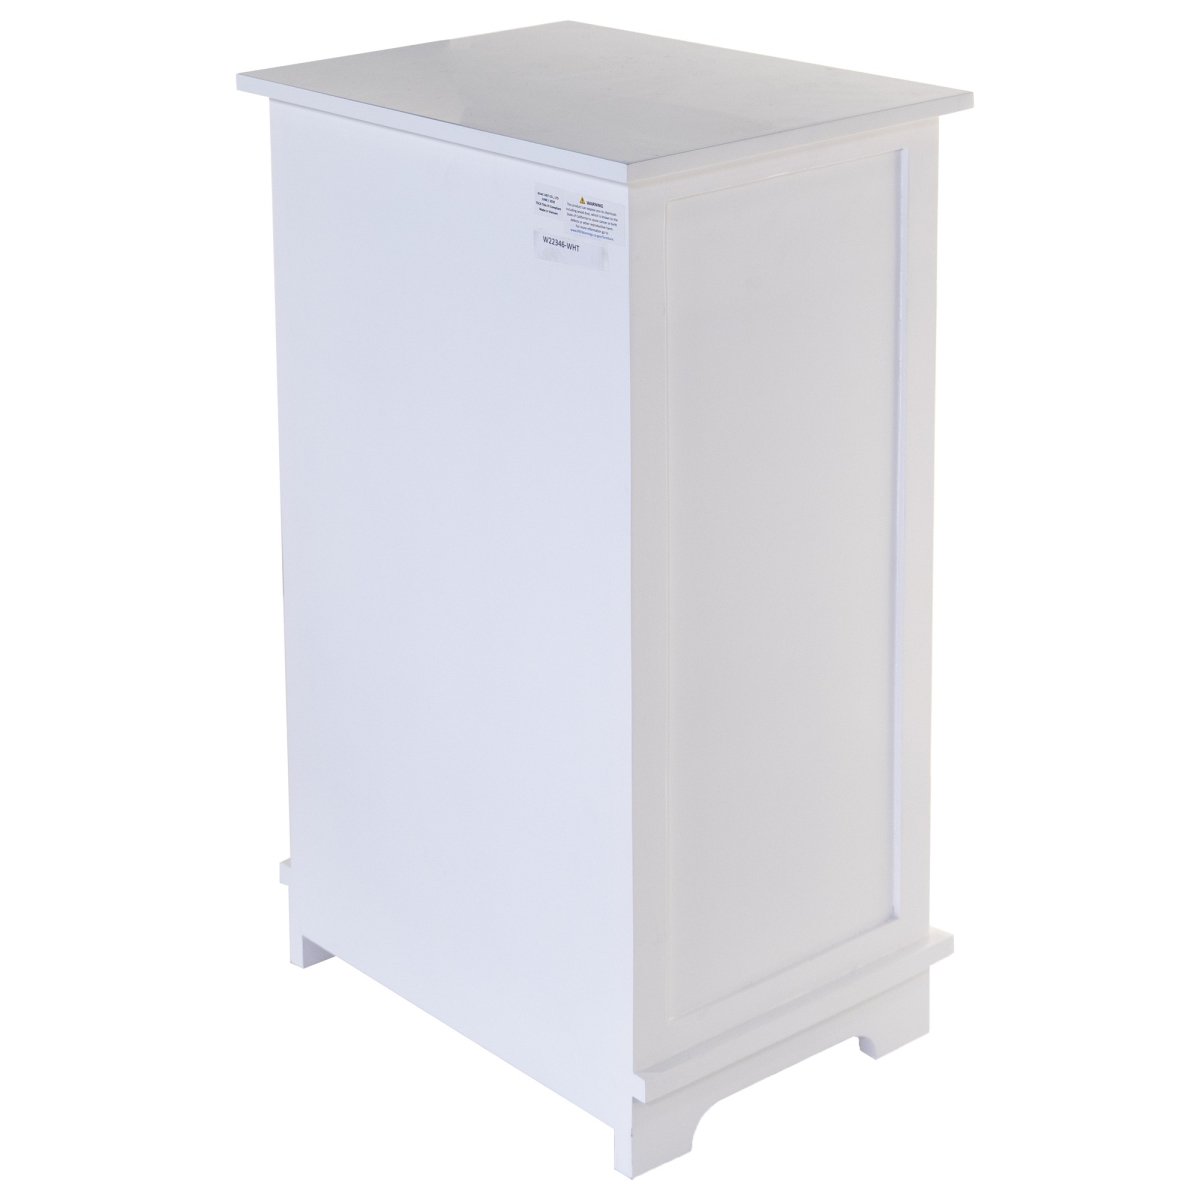 Home Roots 383044 White Wooden Cabinet With 1 Basket Weave Drawer & 1 Door Bottom Storage